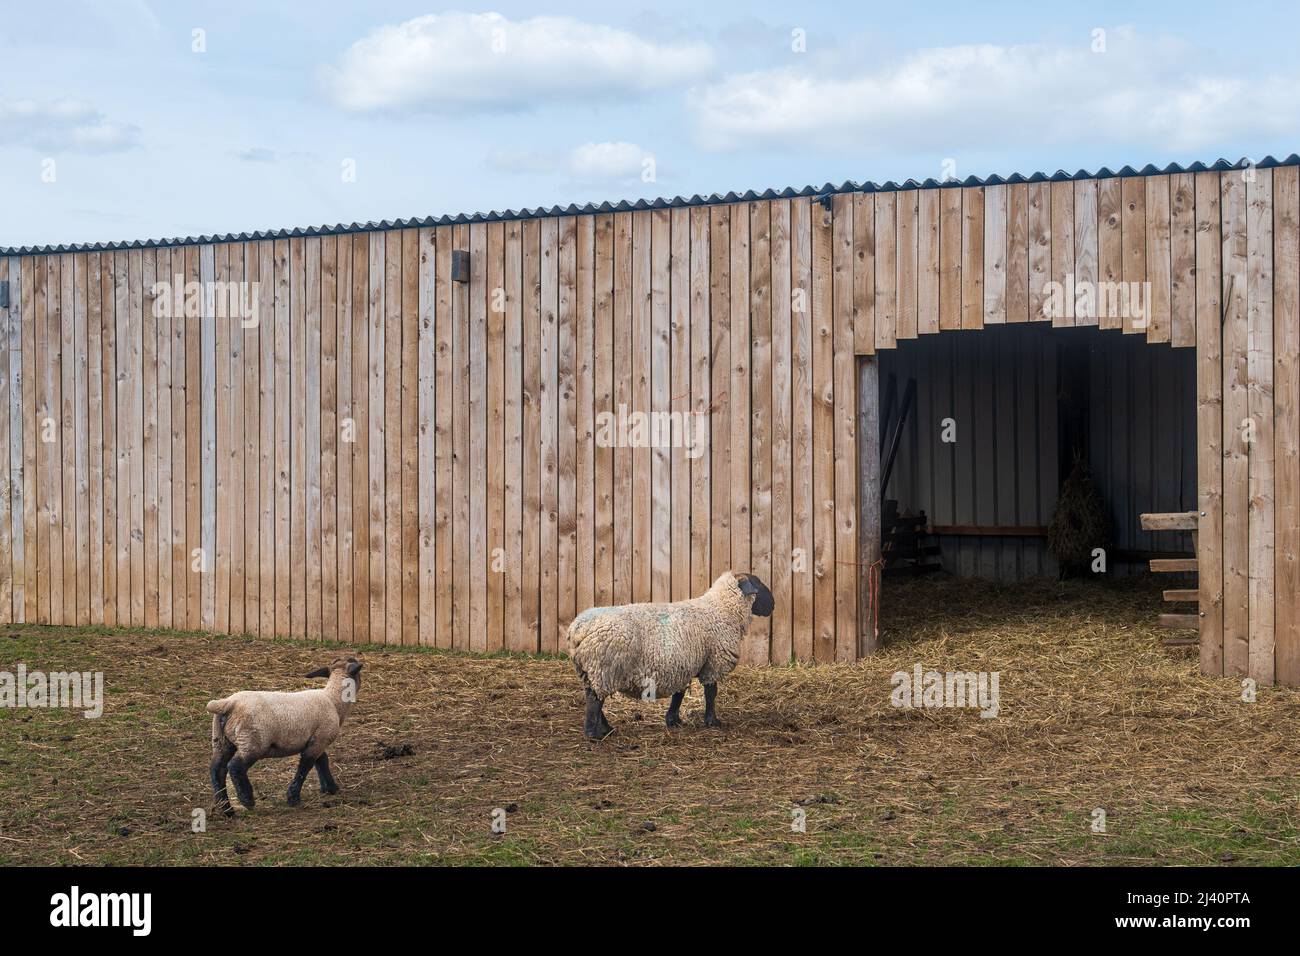 A ewe sheep leads a lamb into the barn for shelter in a farmers field. Agricultural lambing season of Spring. West Yorkshire, UK. Stock Photo